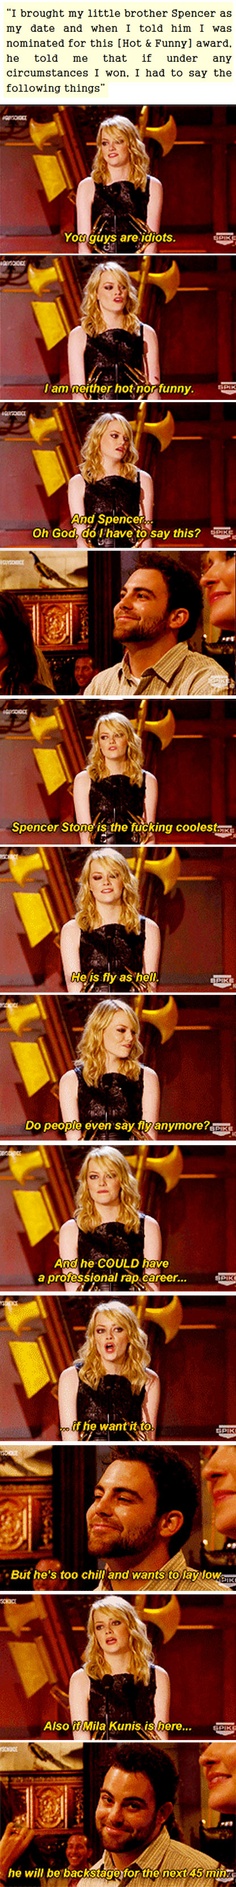 Emma Stone is by far the best sister ever.